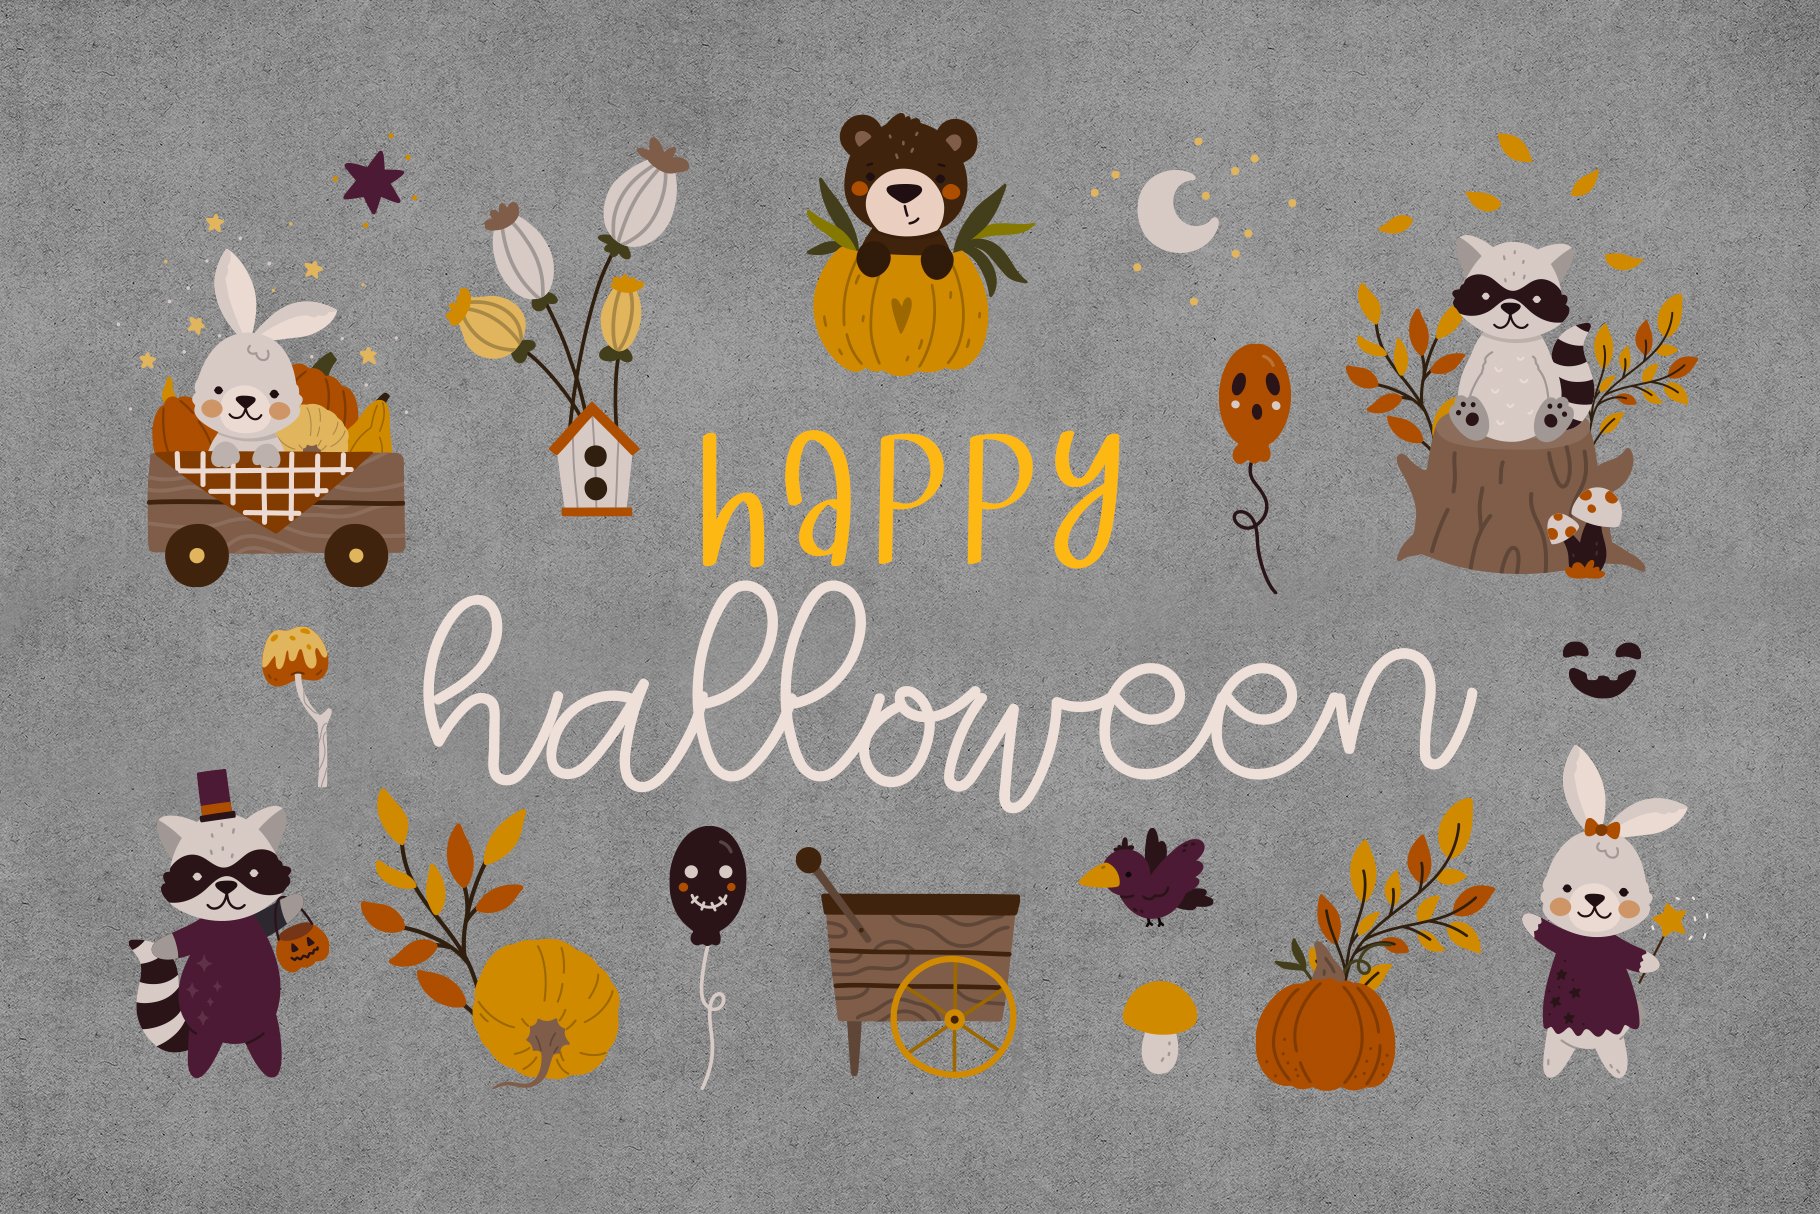 Happy Halloween Graphic Collection cover image.